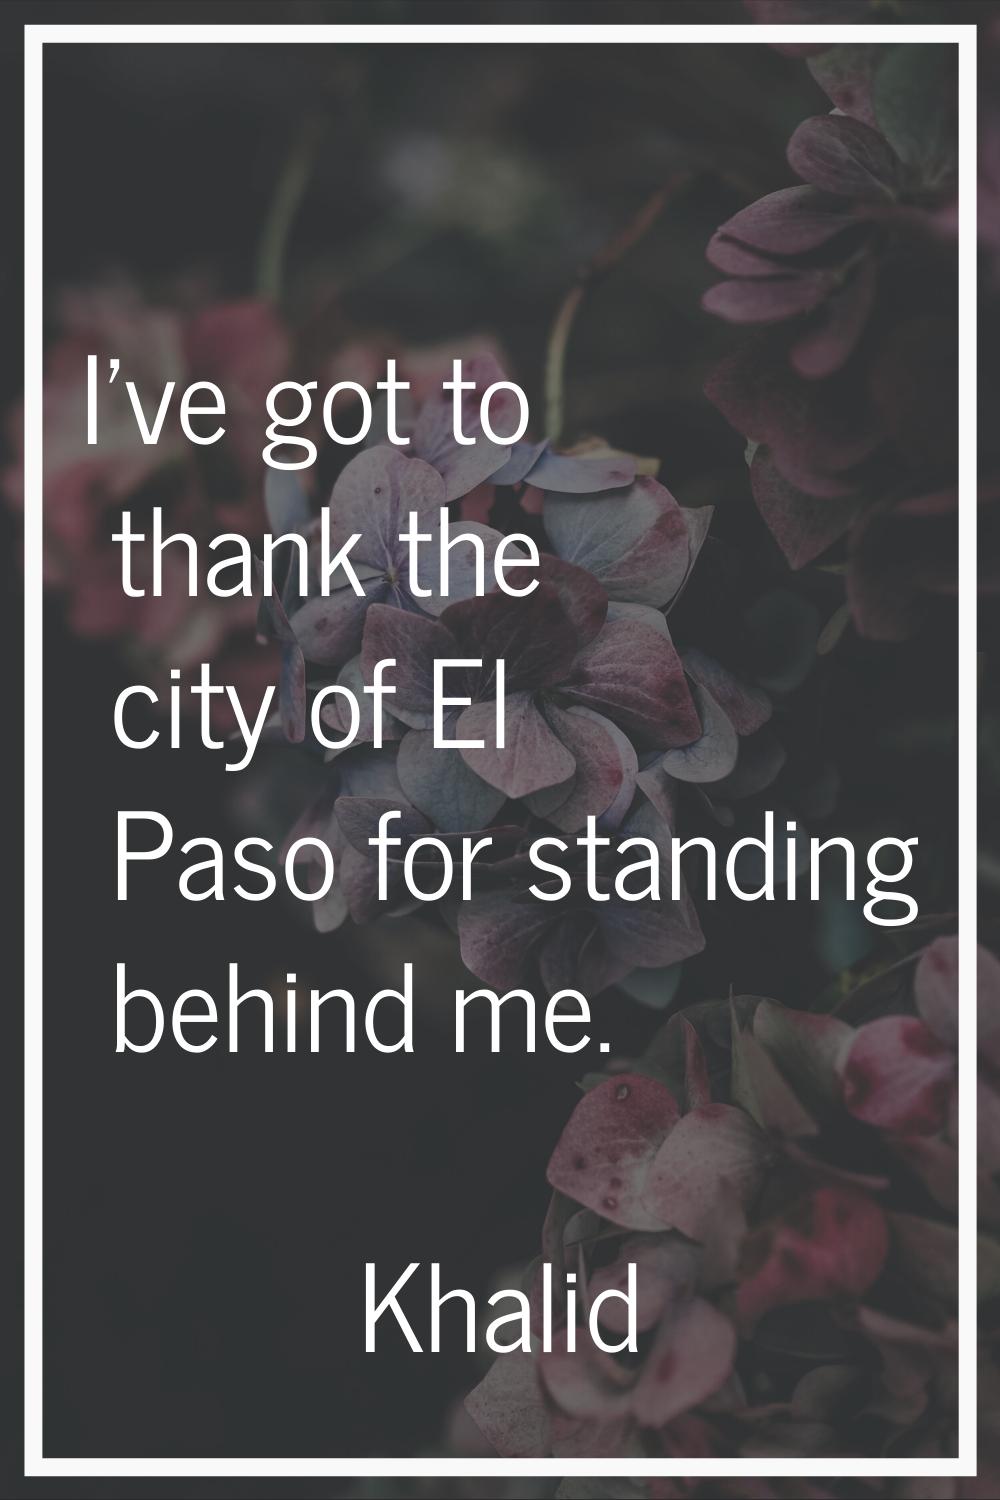 I've got to thank the city of El Paso for standing behind me.